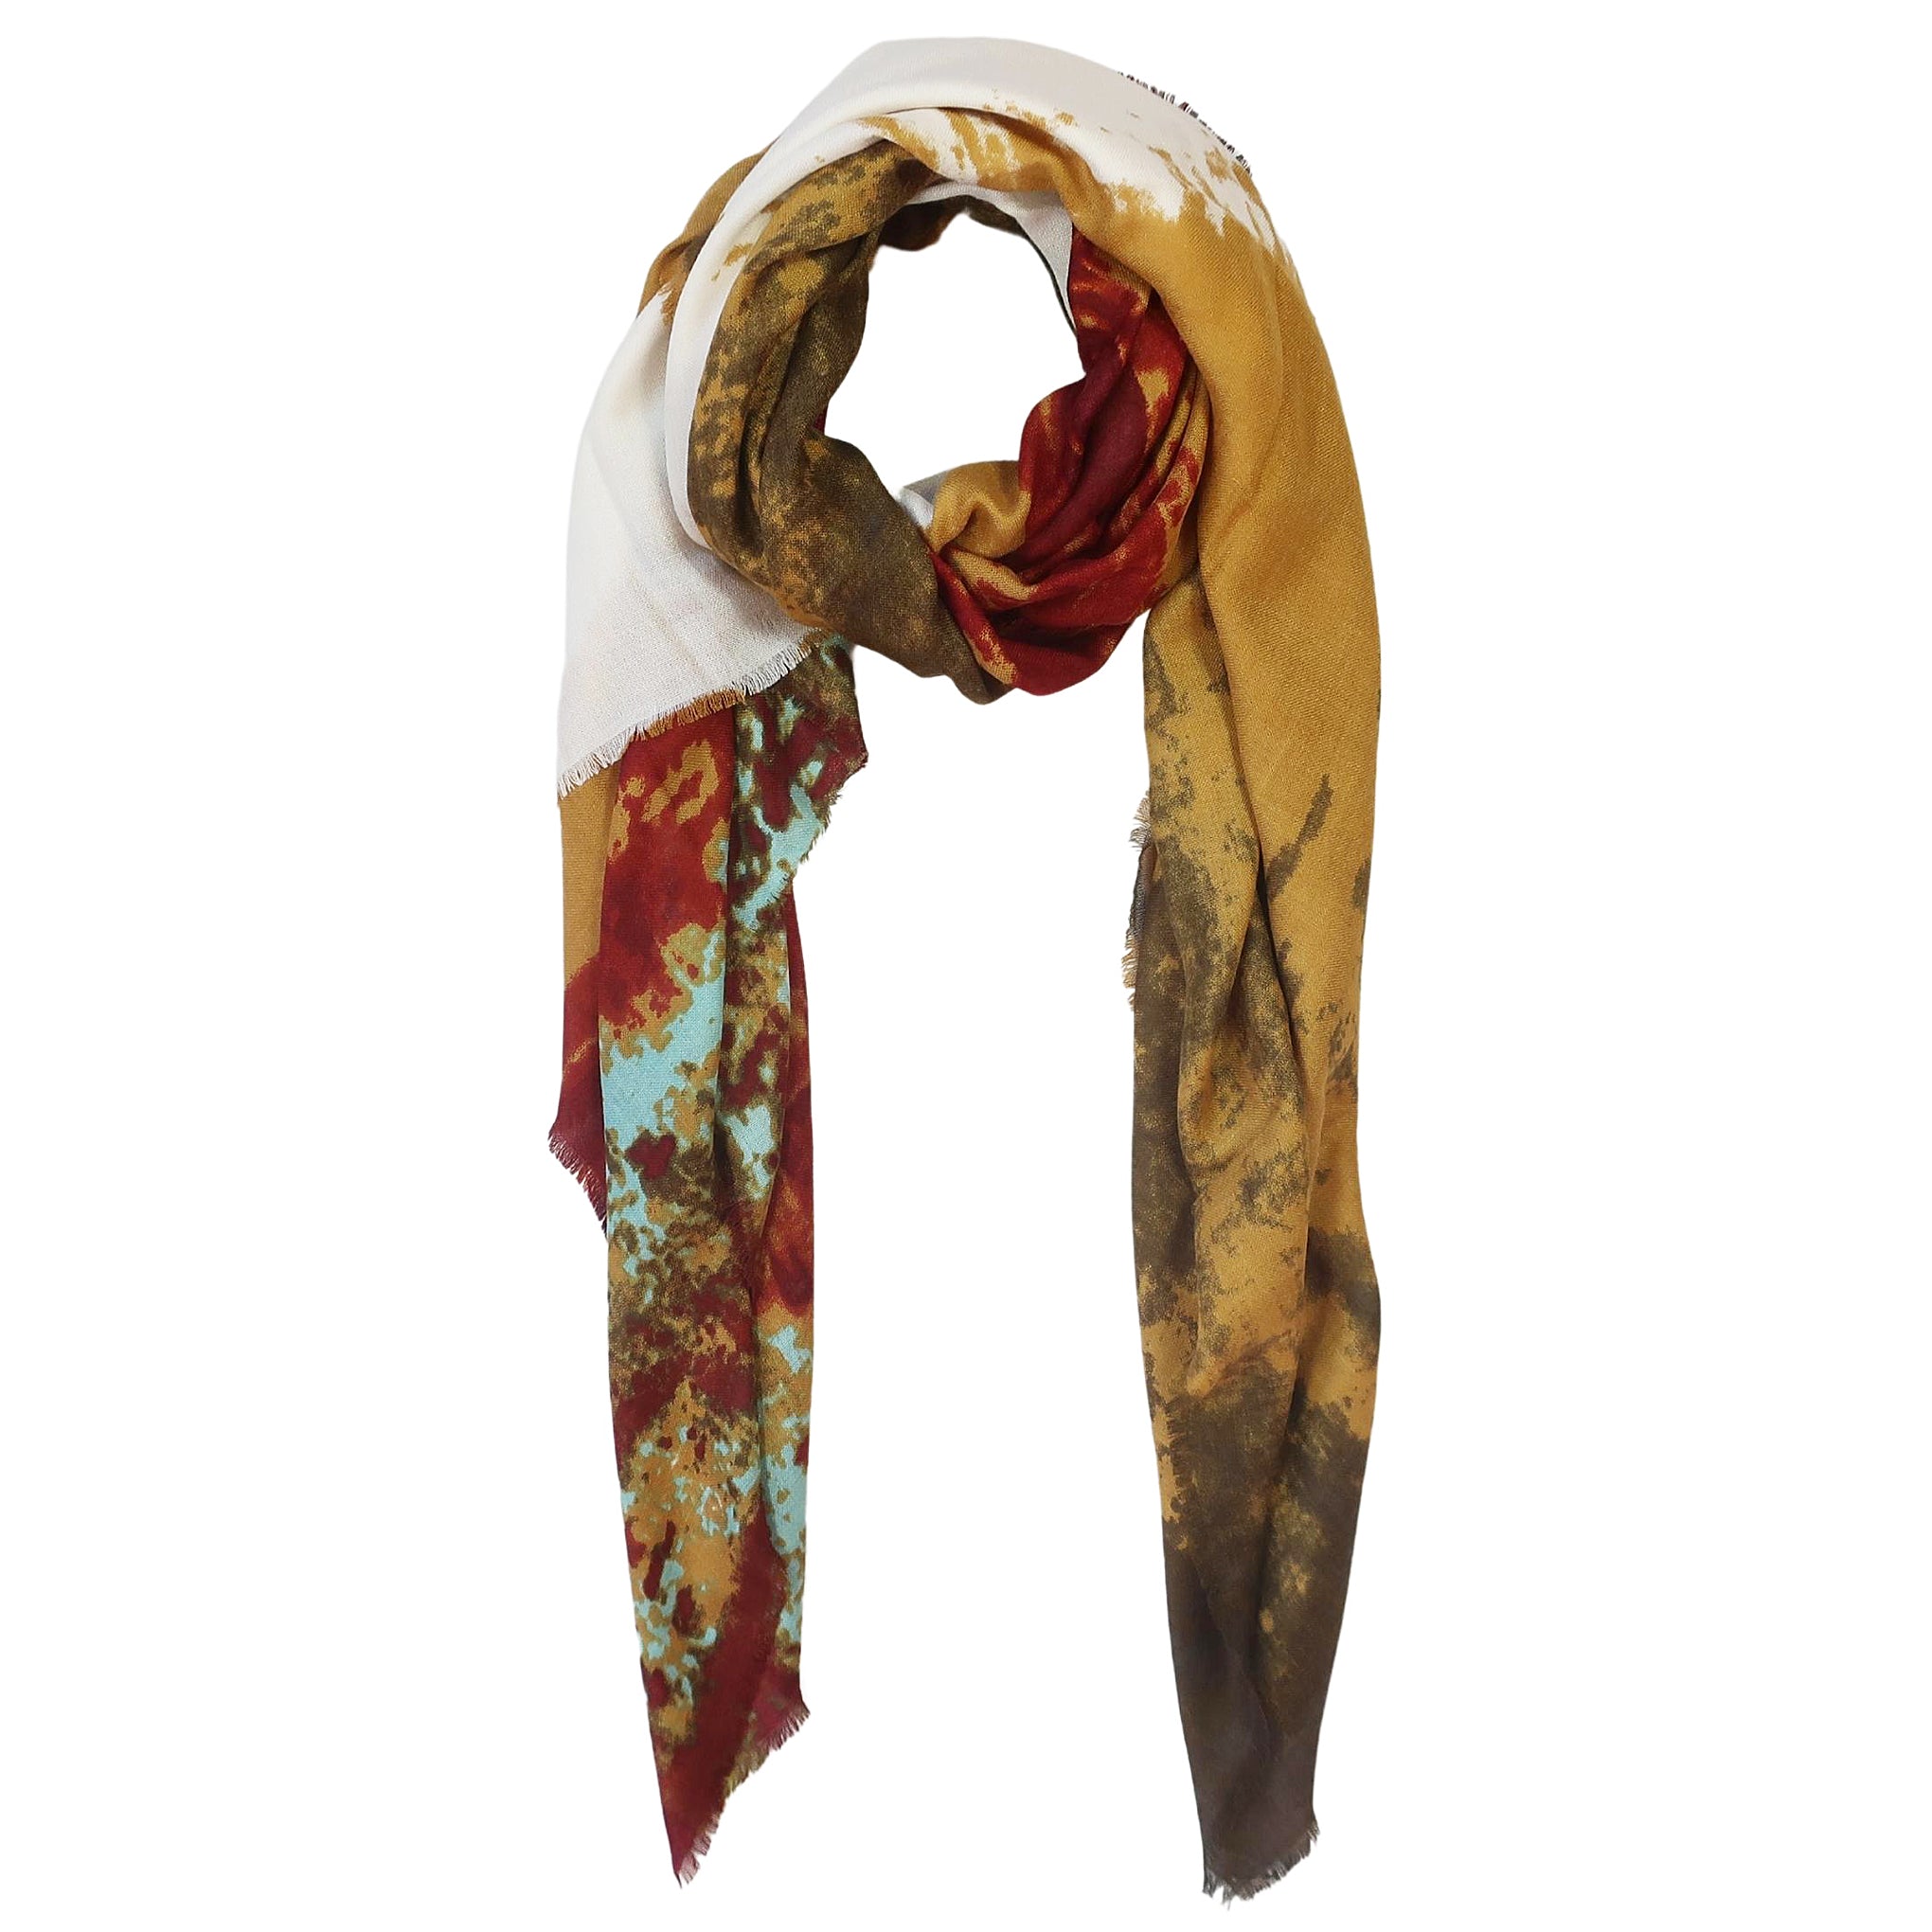 Blue Pacific Modal and Cashmere Scarf in Watercolor Mustard Yellow and Red